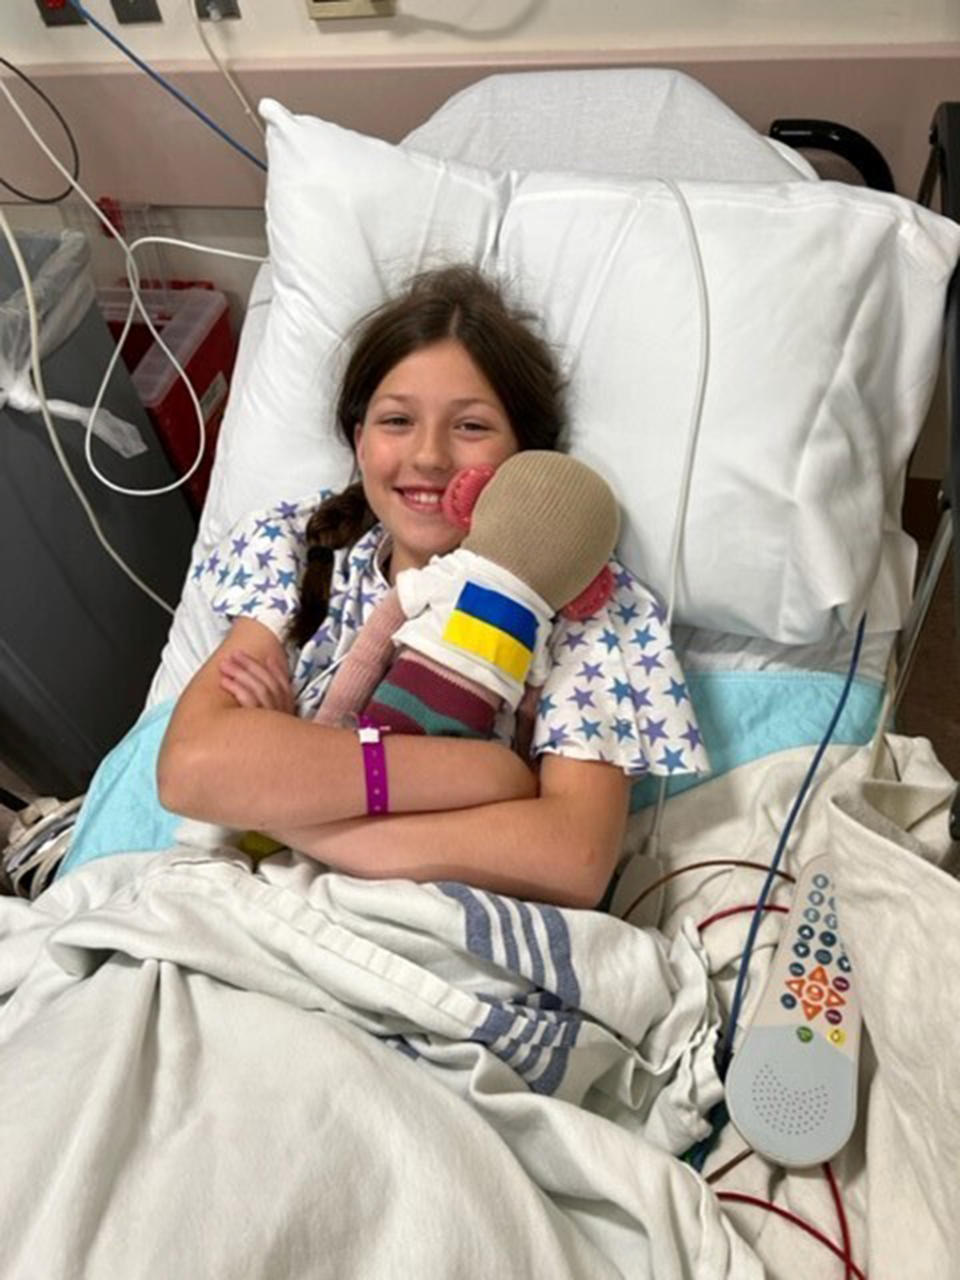 A team at Catholic Health St. Francis Hospital & Heart Center performed a minimally invasive procedure to close the hole between the two chambers of Polina's heart (Catholic Health St. Francis Hospital & Heart Center)